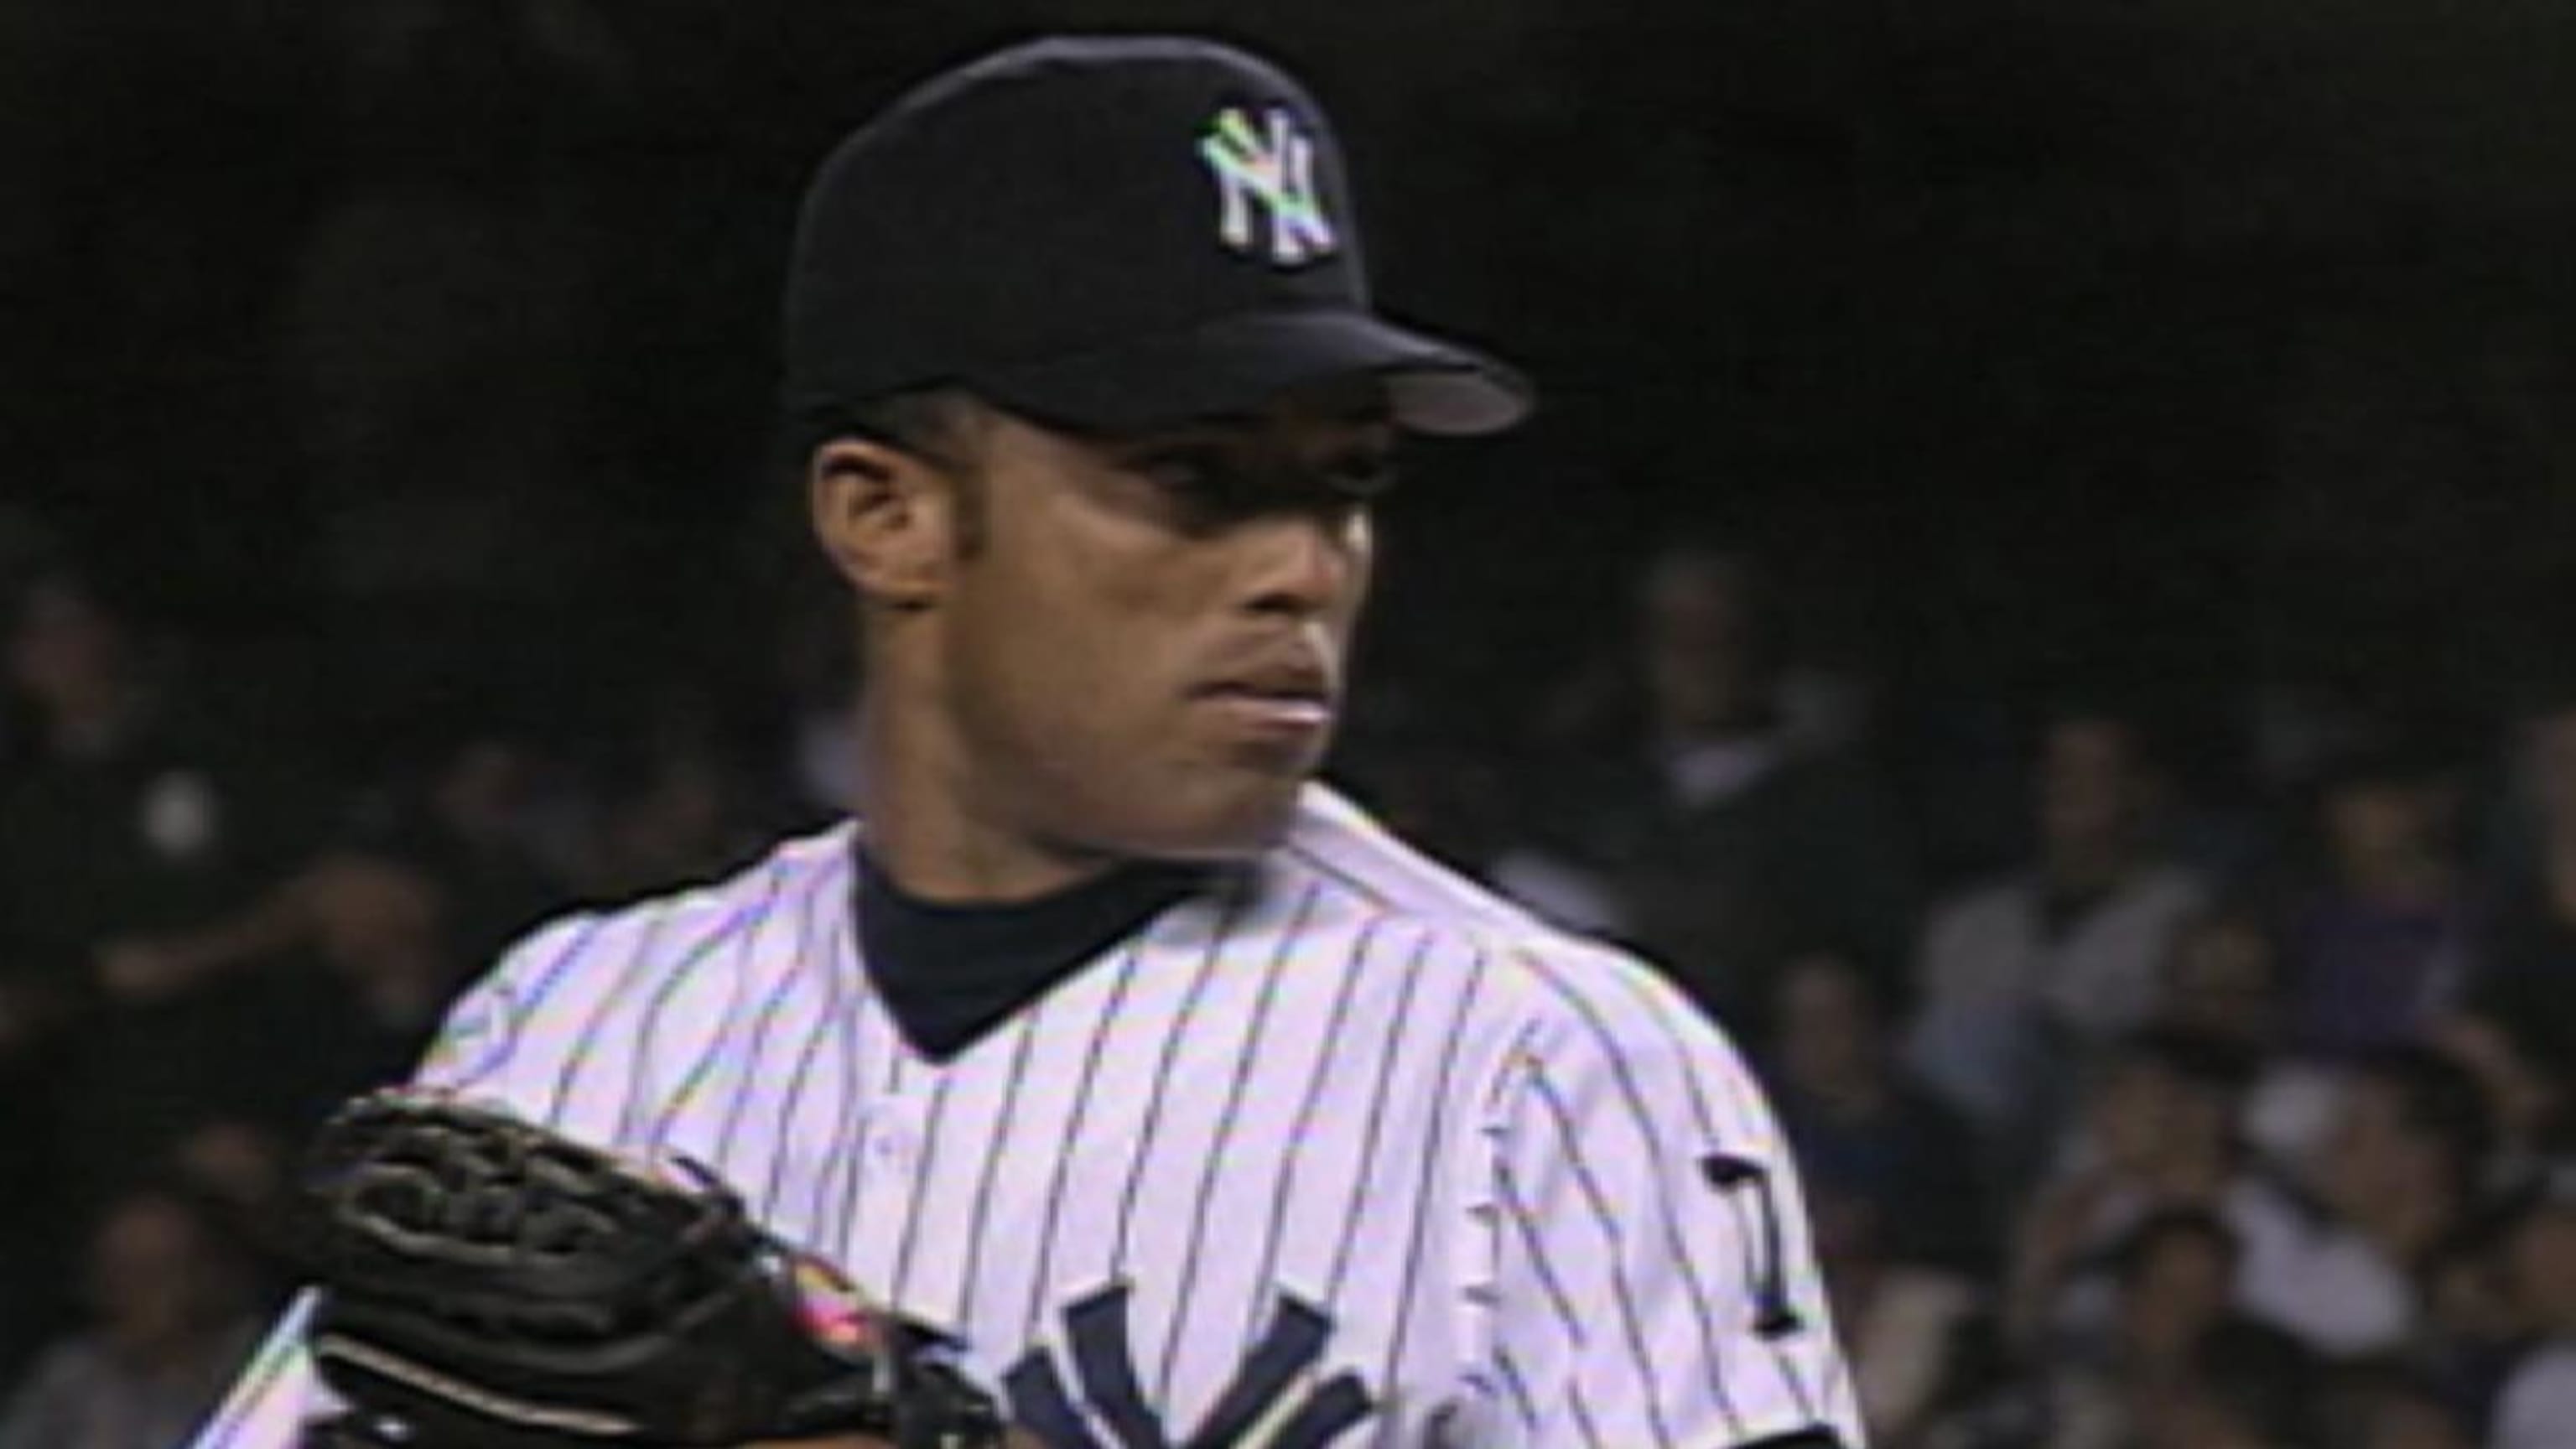 Remembering Mariano Rivera's historic career on his 50th birthday